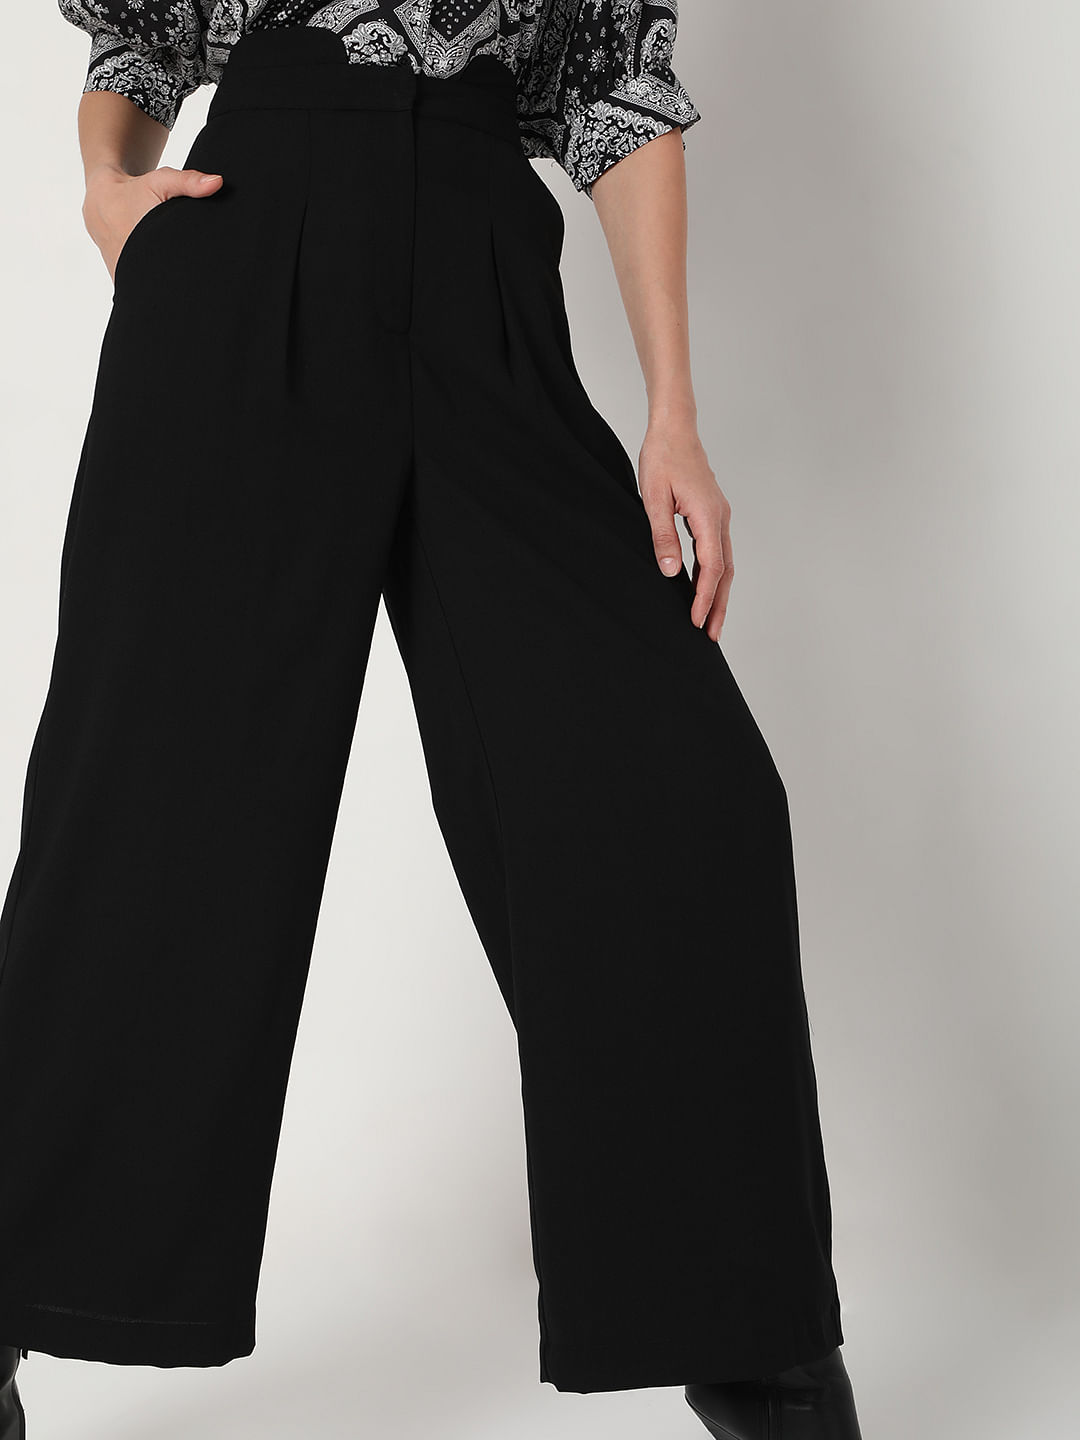 How to style my look with black wide leg pants - Quora